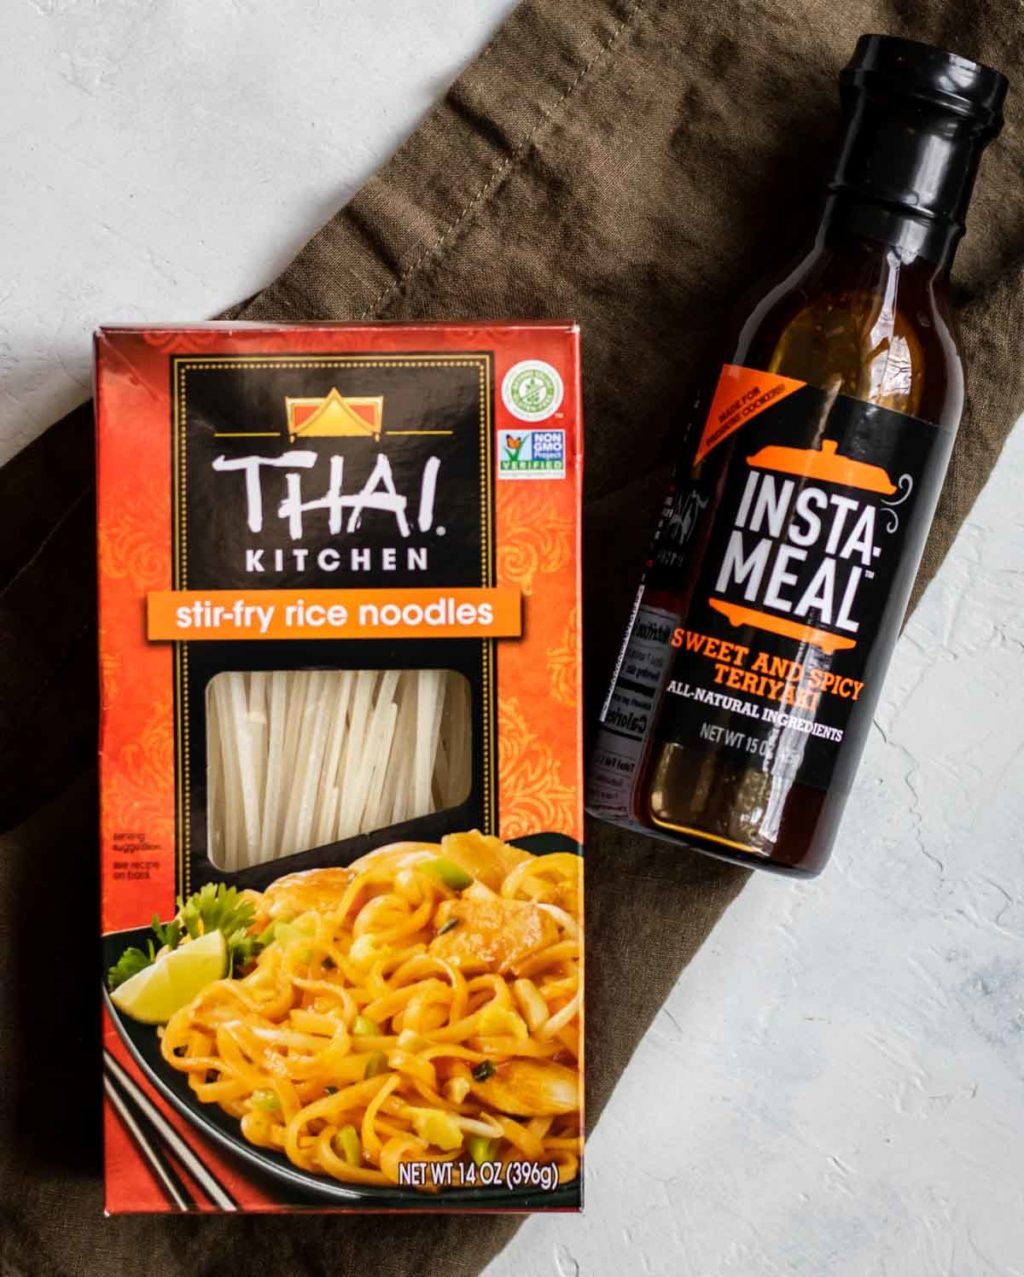 Thai Kitchen Rice Noodles and Instant Pot Insta-Meal sauce